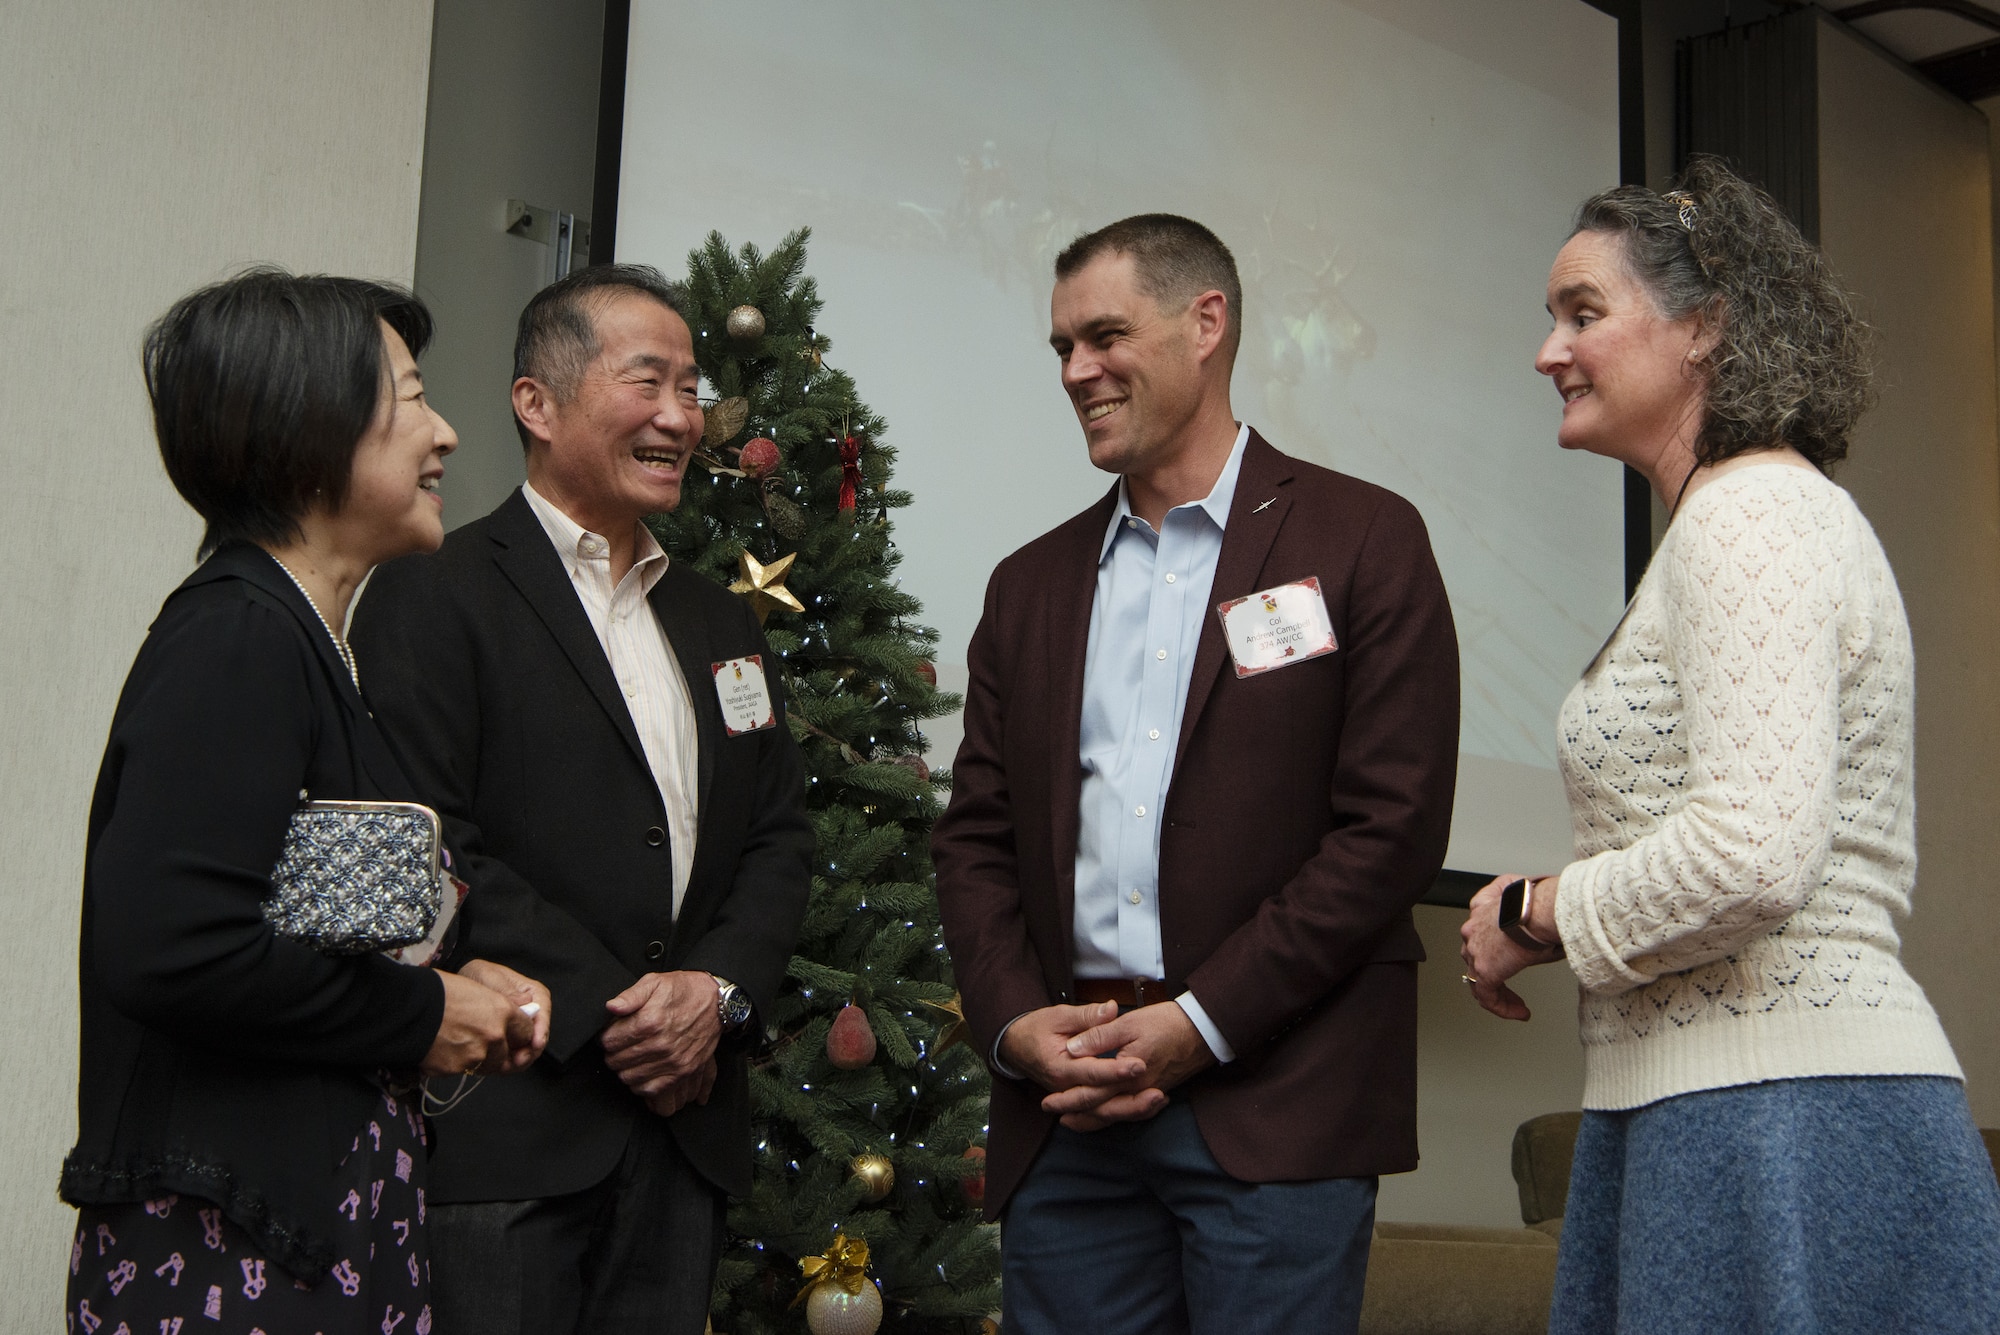 Col. Andrew Campbell, center right, 374th Airlift Wing commander, and his wife Katie Campbell, right, talk to Yoshiyuki Sugiyama, Japan America Air Forces Goodwill Association (JAAGA) president and former Japan Air Self Defense Force Air Defense Command commander, and his wife Fumiko Sugiyama, during the 374th AW Holiday Social at the Yokota Officers Club at Yokota Air Base, Japan, Dec. 11, 2021. The social brought members of Yokota Air Base, Japan Air Self Defense Force and Japanese civic leaders together, to celebrate the holiday and talk about their friendship moving forward. Lt. Gen. Ricky Rupp, U.S. Forces Japan and 5th Air Force commander, and Christine Bordine, Defense Special Representative-Japan director, also attended the event to interact with local civic leaders. (U.S. Air Force photo by Tech. Sgt. Christopher Hubenthal)